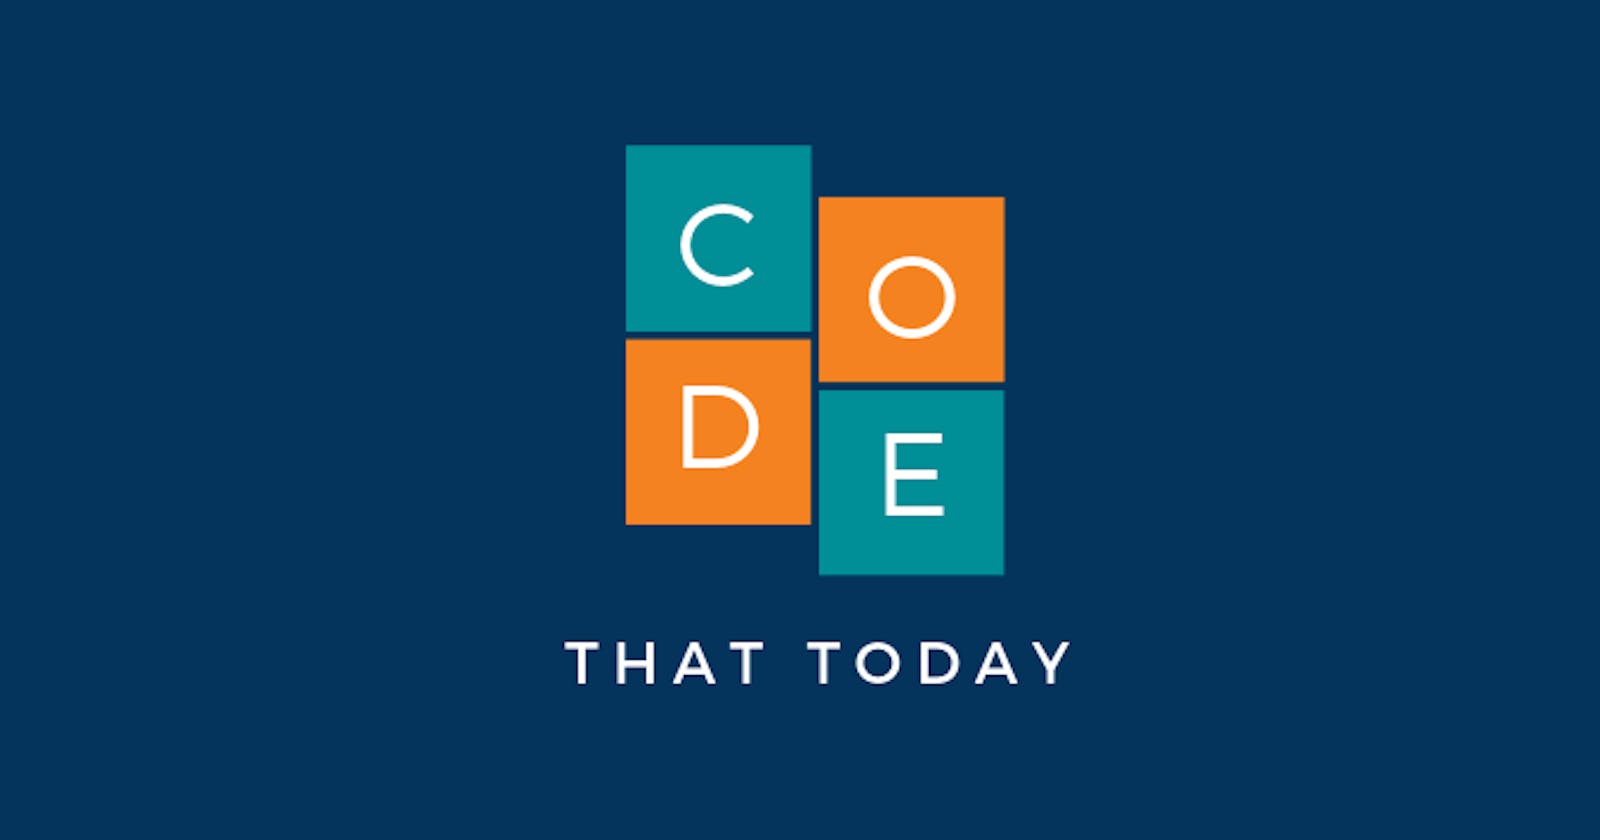 Introducing CodeThat.today 🙌🍾